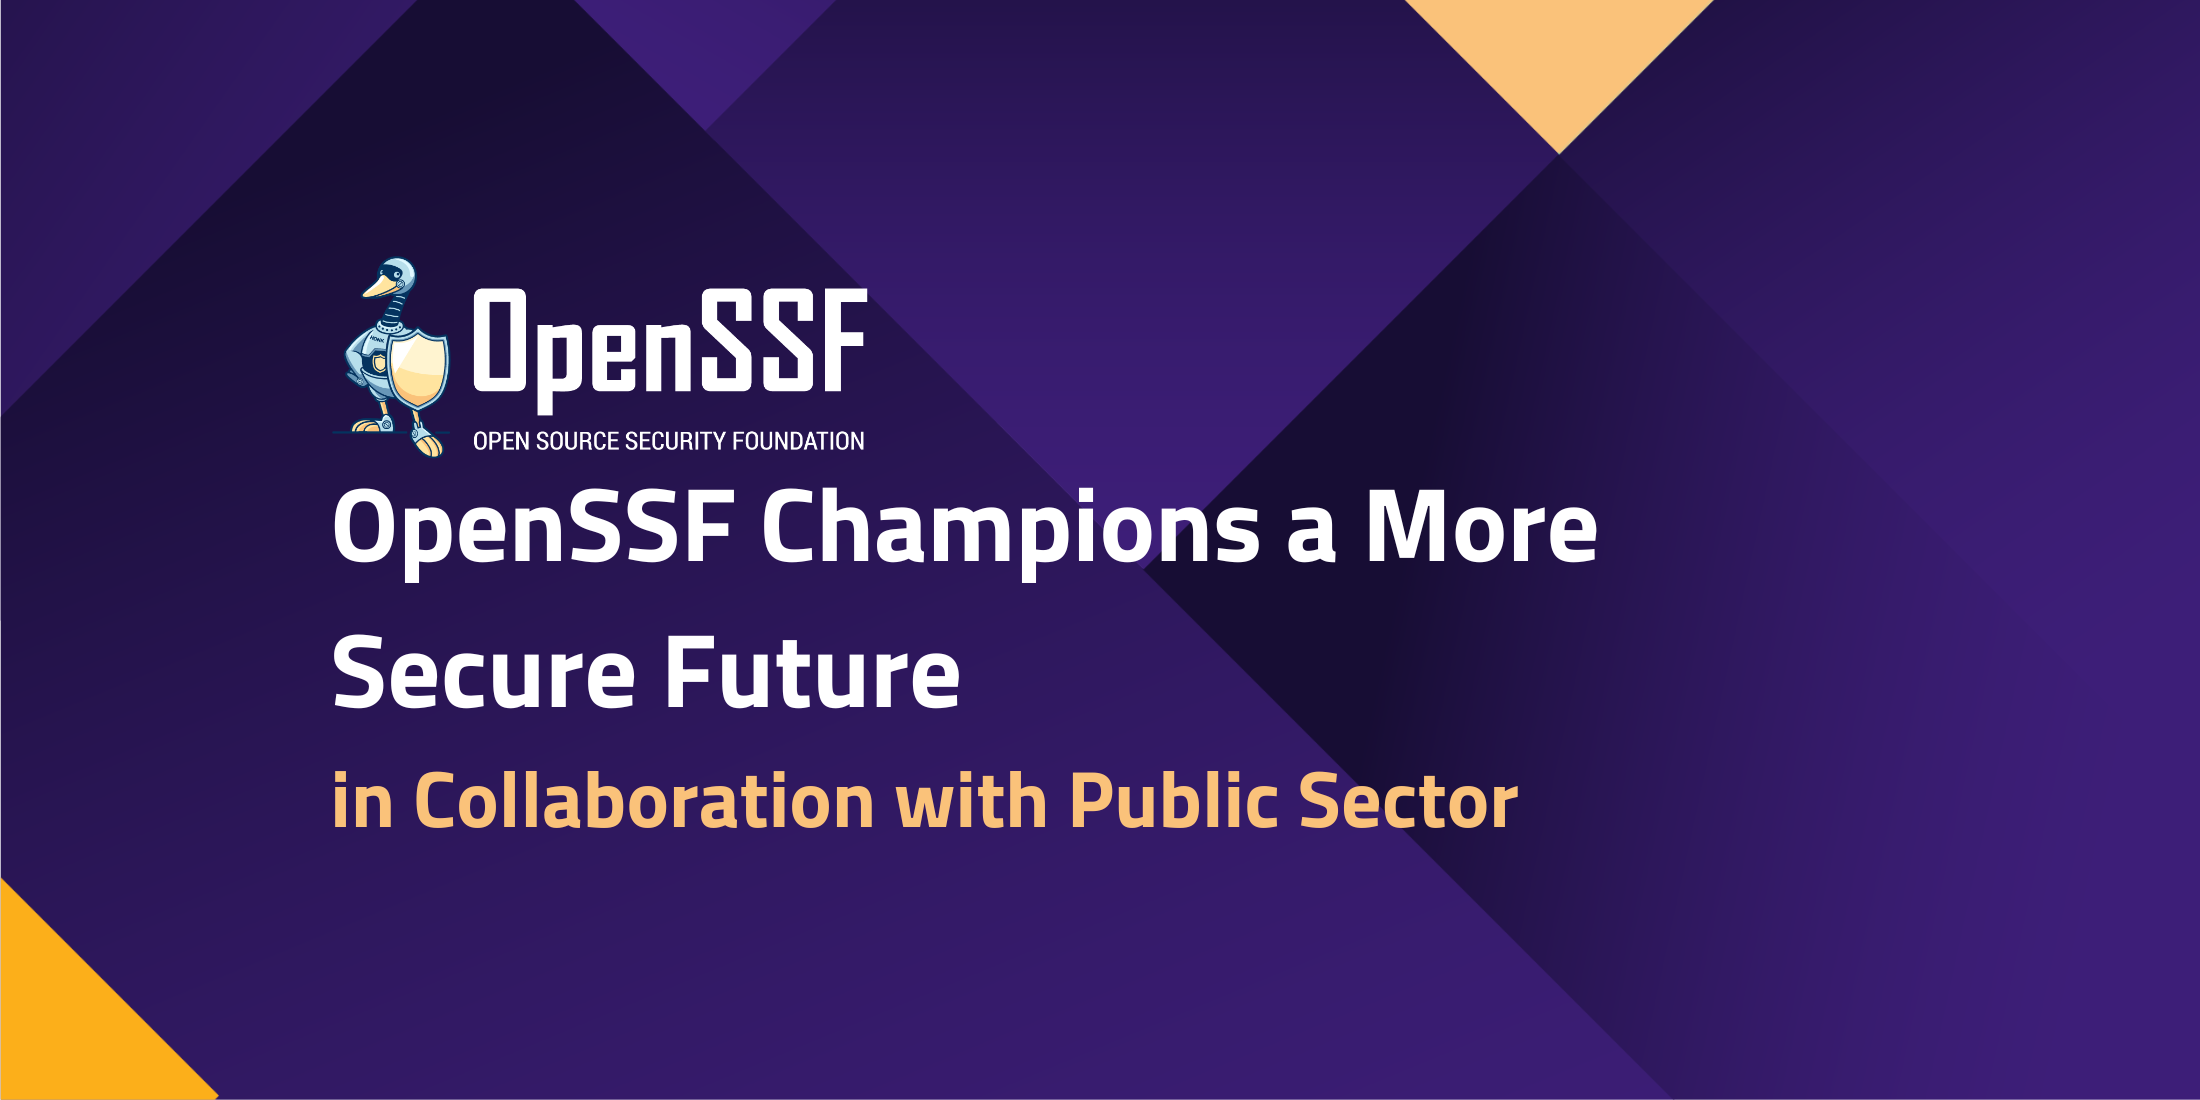 OpenSSF Champions a More Secure Future in Collaboration with Public Sector